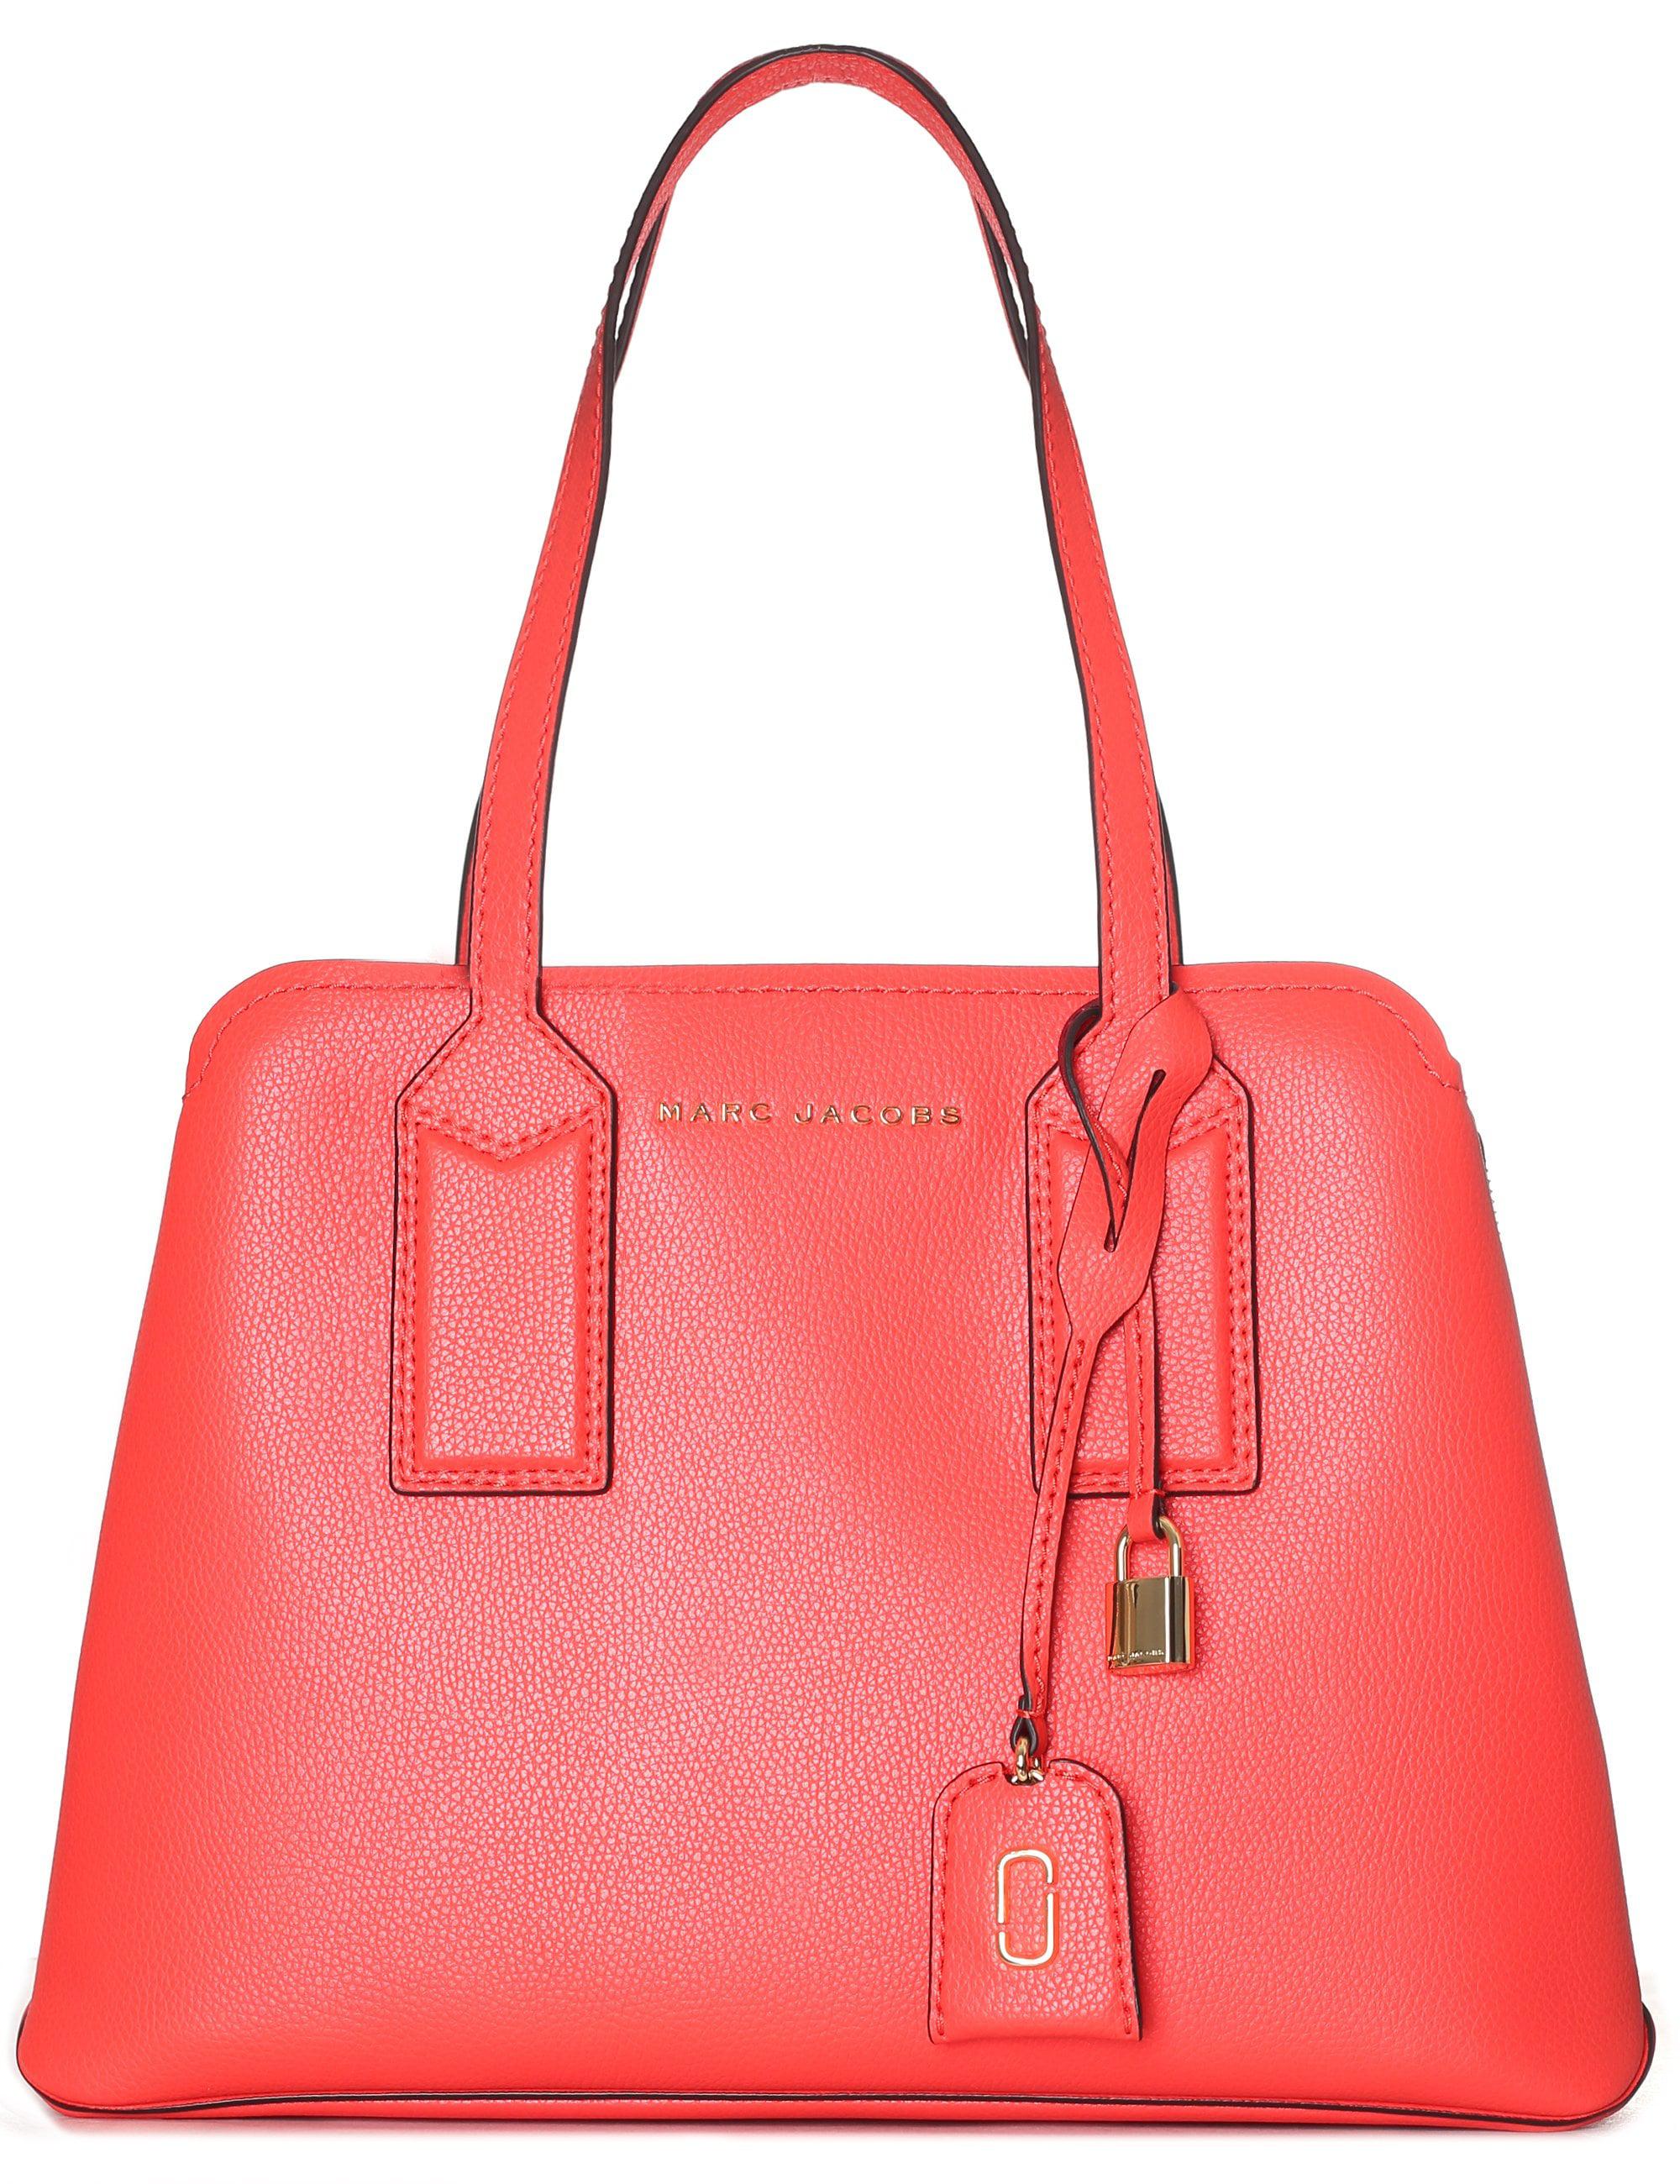 Marc Jacobs The Editor 38 Women's Shoulder Bag Poppy Red in Red - Lyst